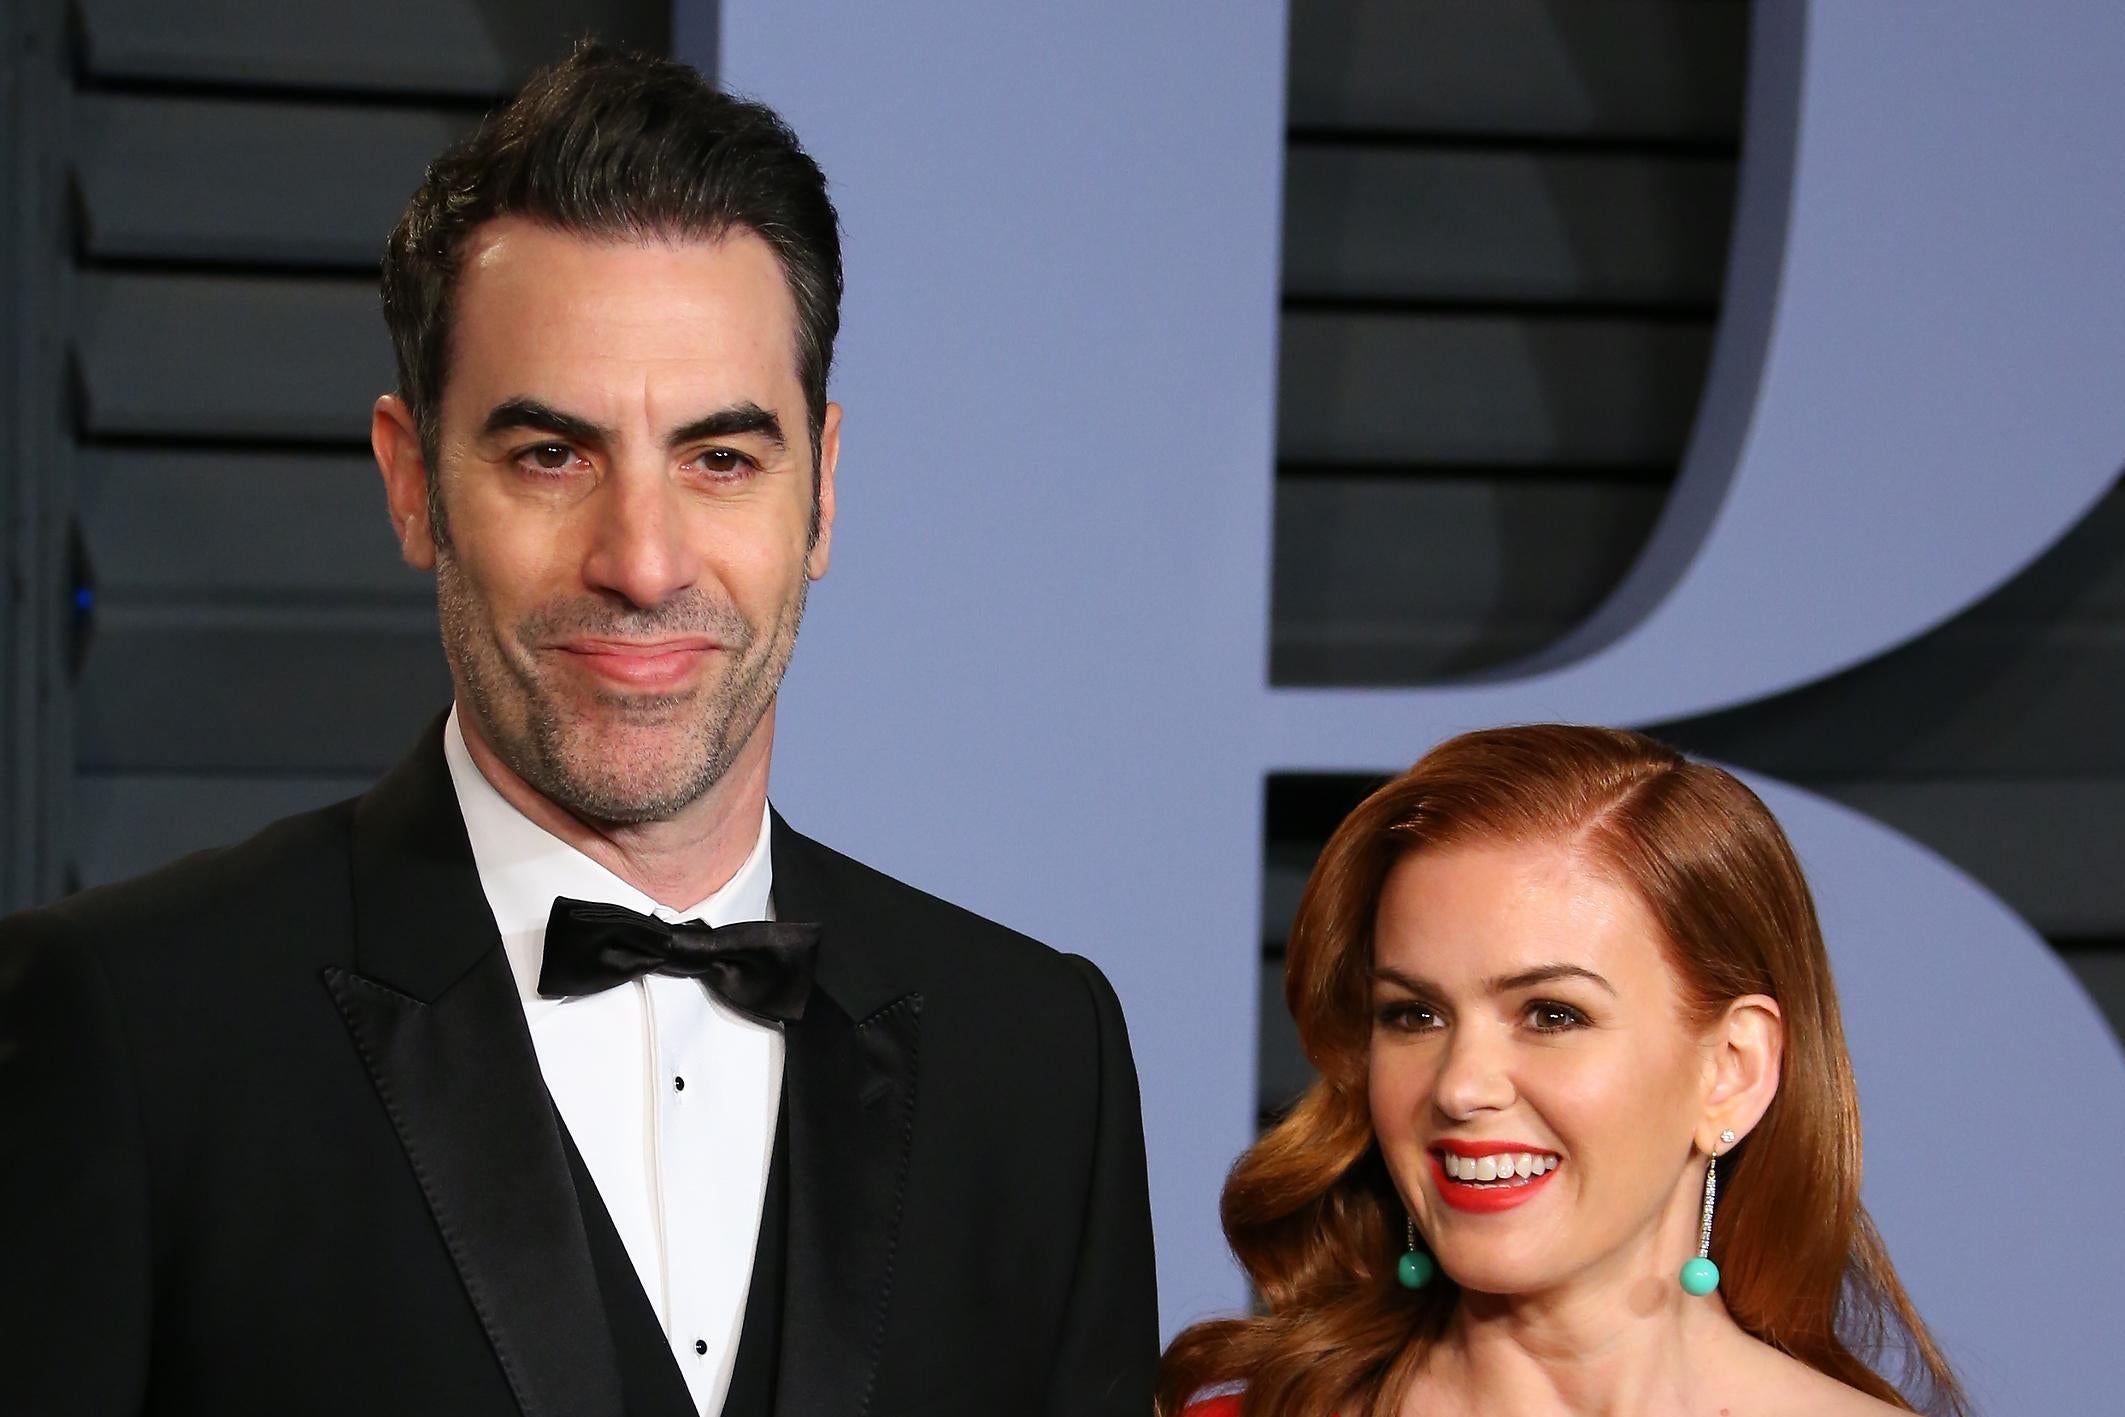 Sacha Baron Cohen and Isla Fisher on a red carpet. He is a head taller than she is.